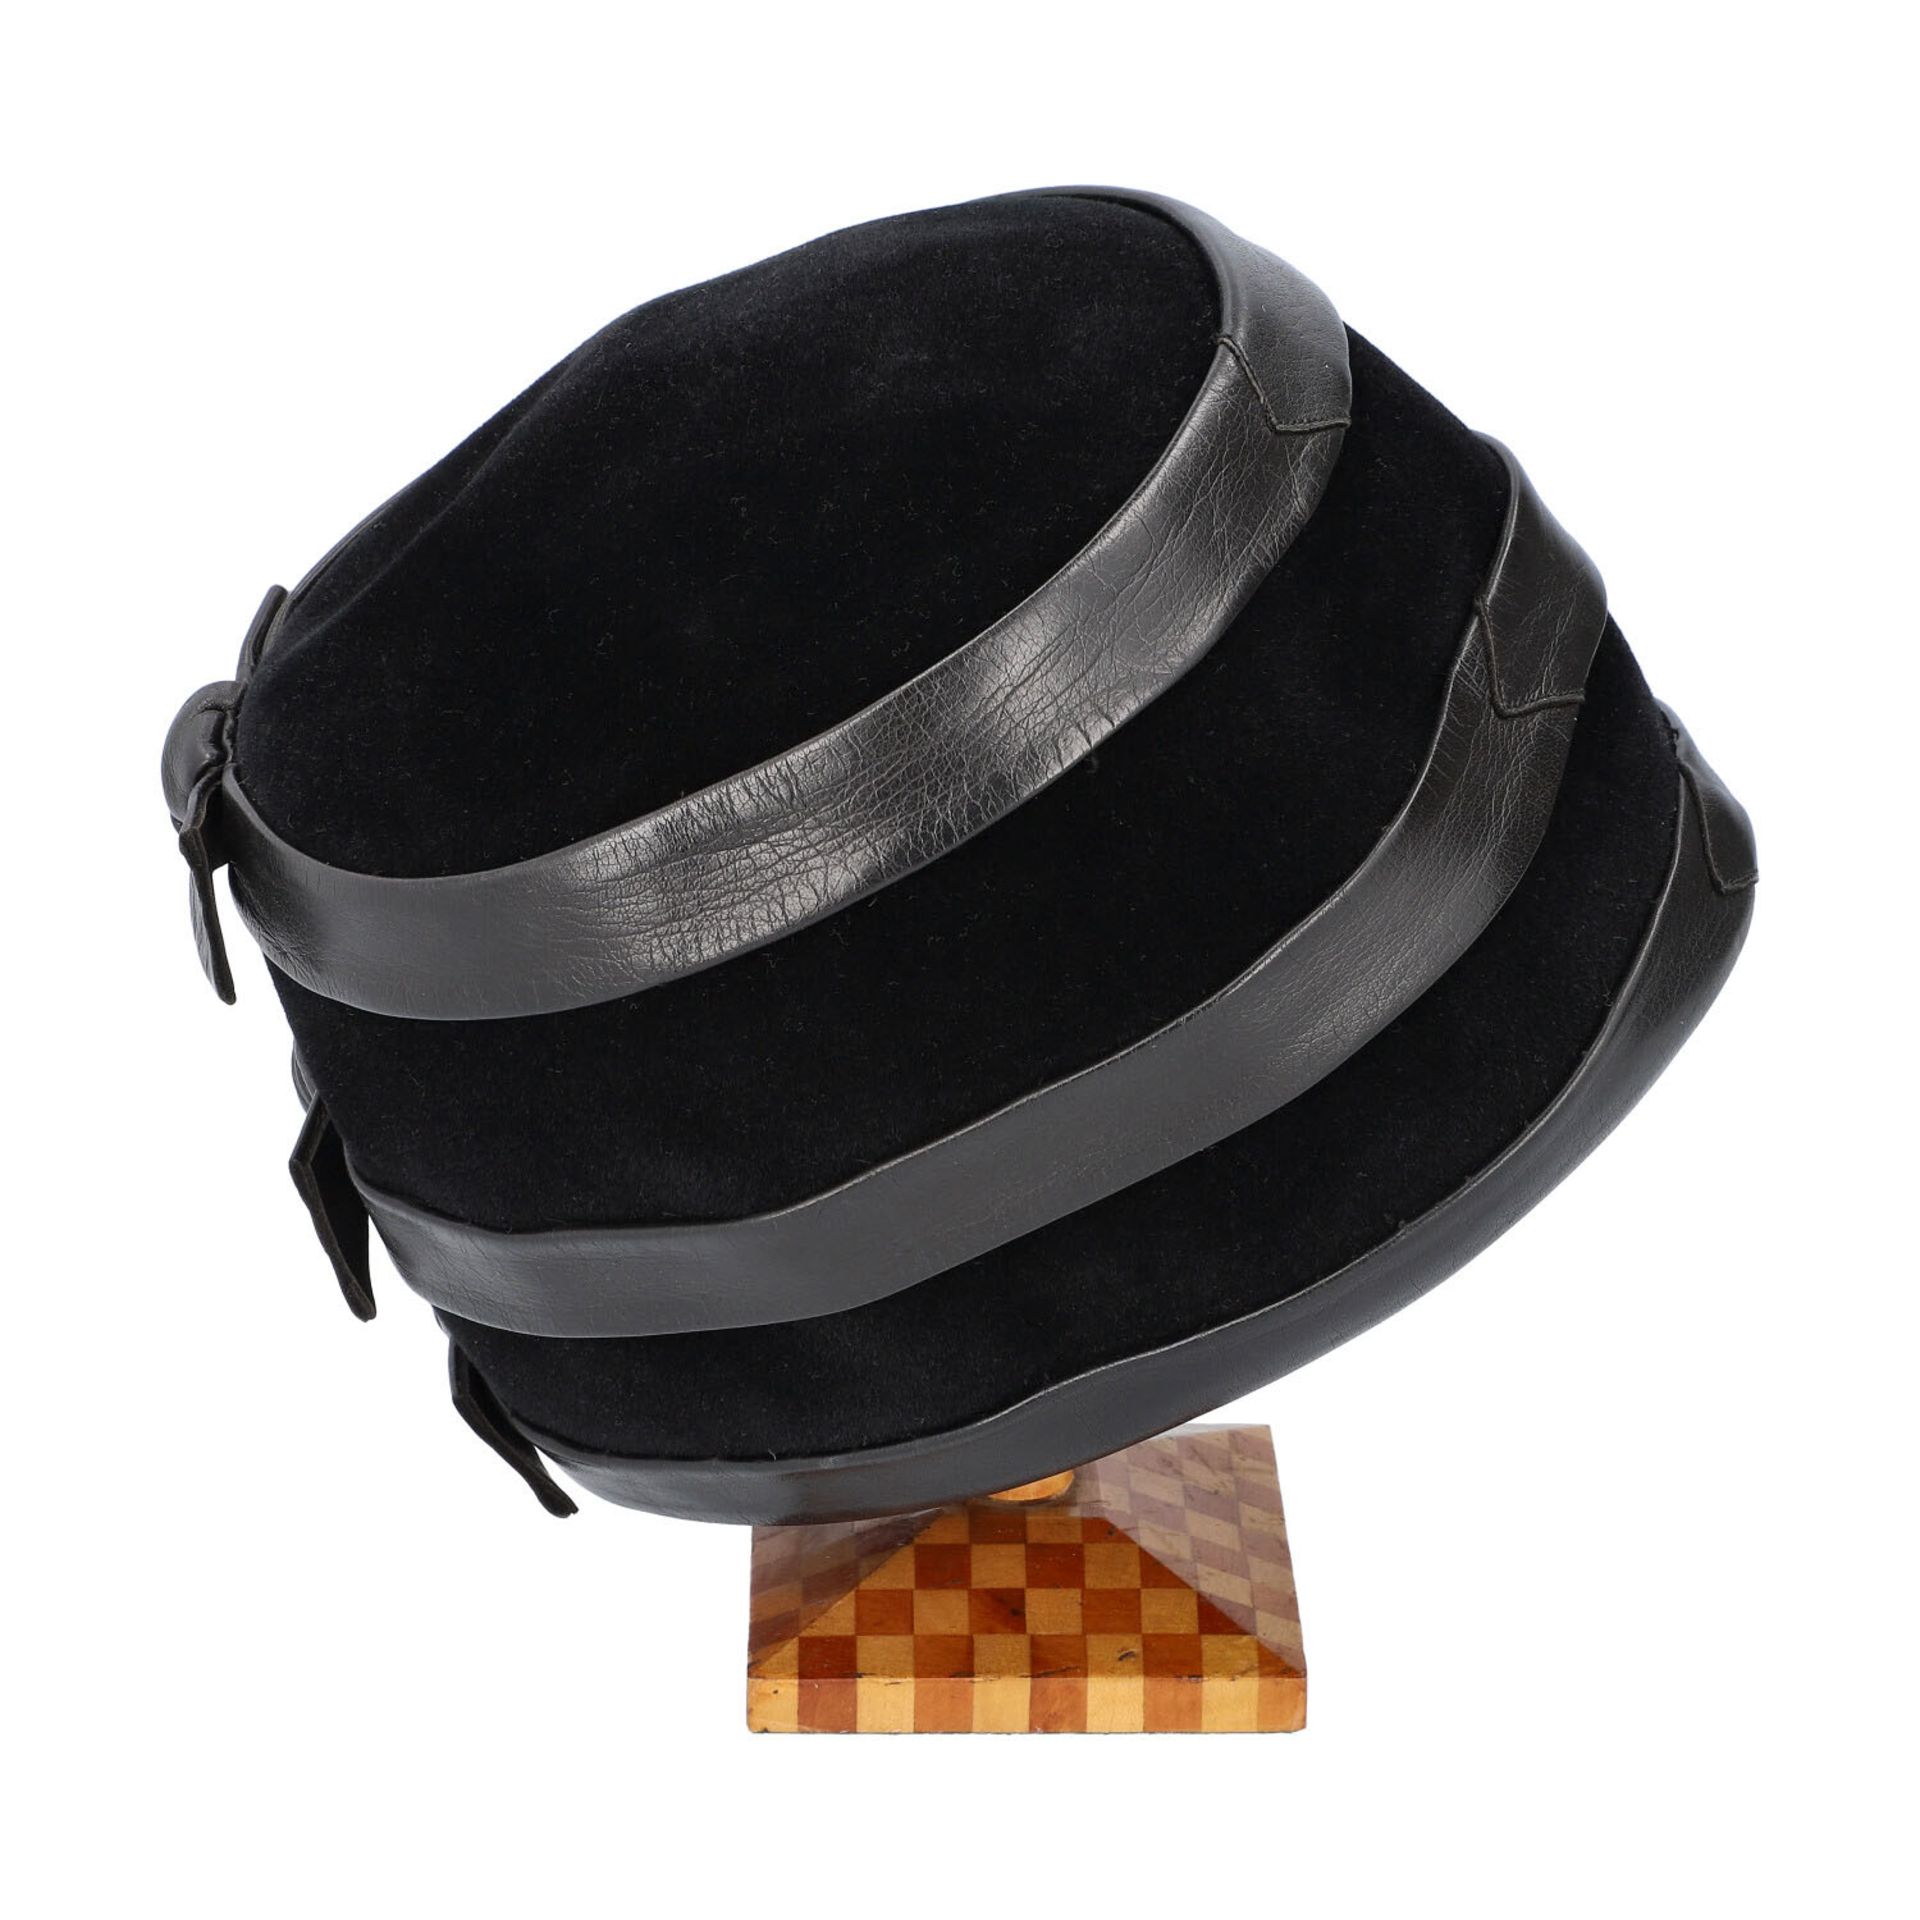 CHRISTIAN DIOR LICENCE CHAPEAUX. - Image 3 of 4